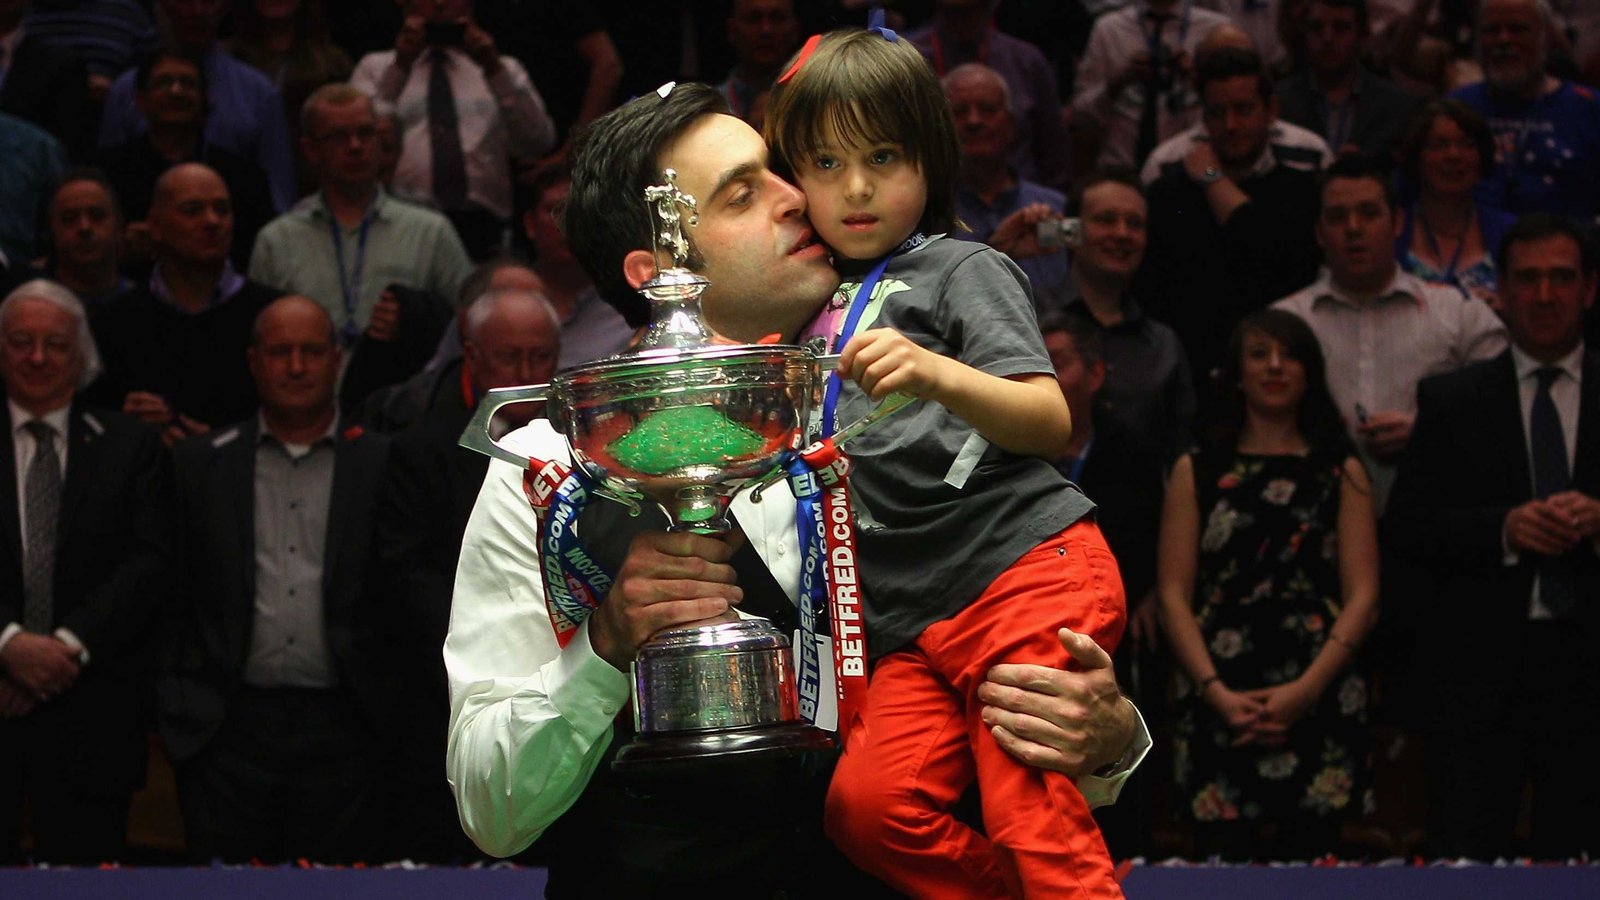 World Snooker Awards 2012 - O'Sullivan Wins Player Of The Year